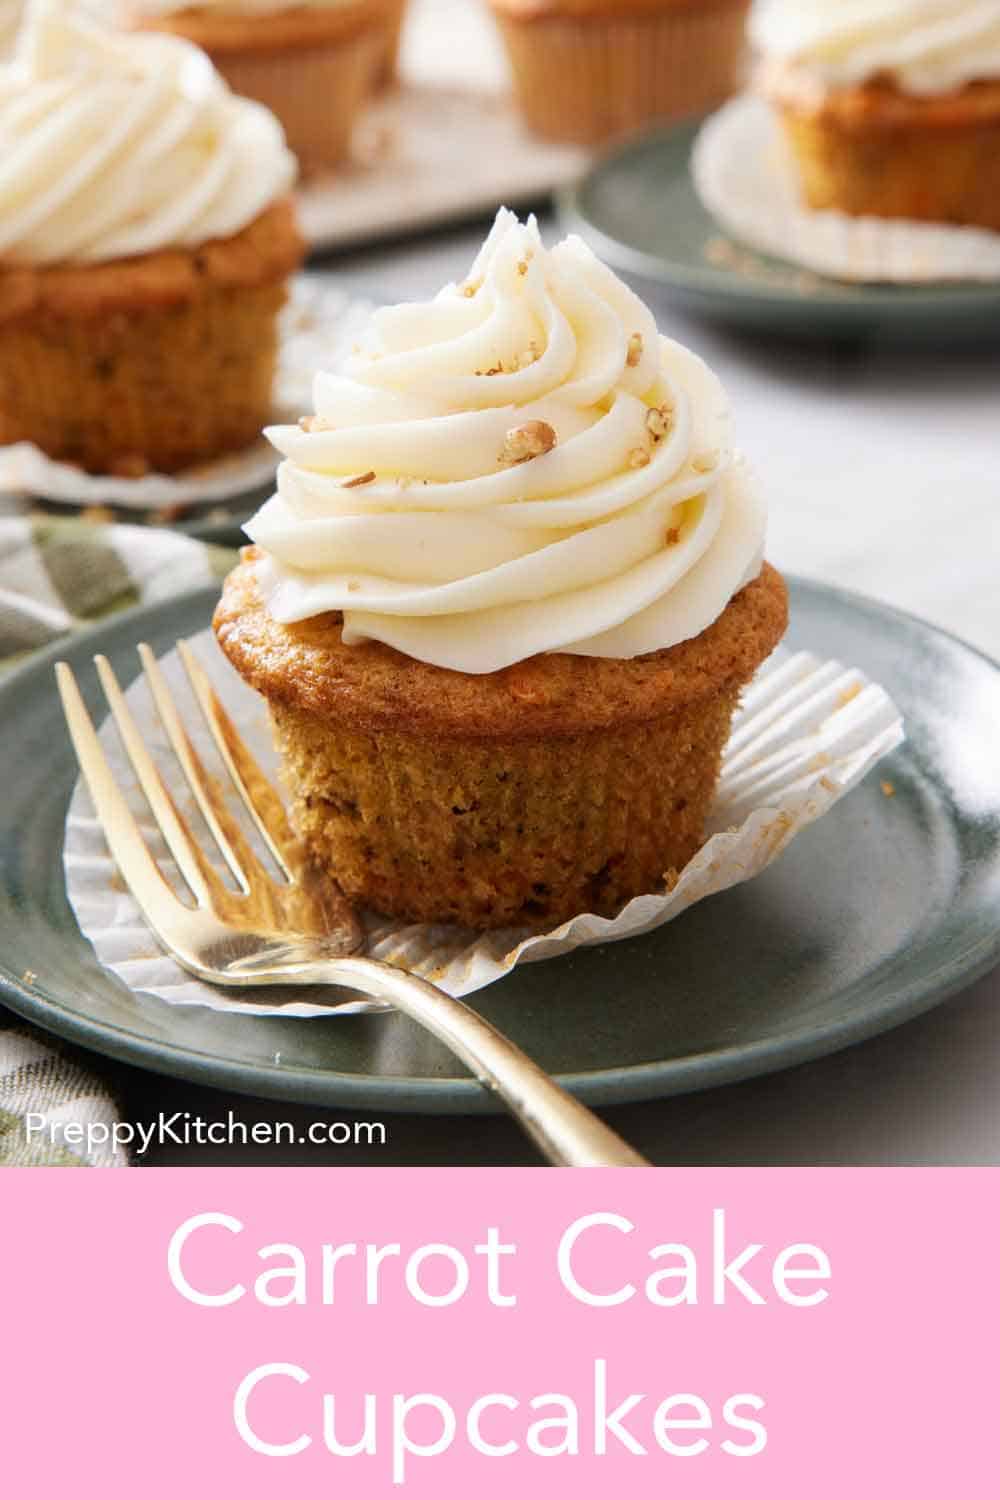 Easy Carrot Cake Cupcakes with Cream Cheese Frosting - Preppy Kitchen